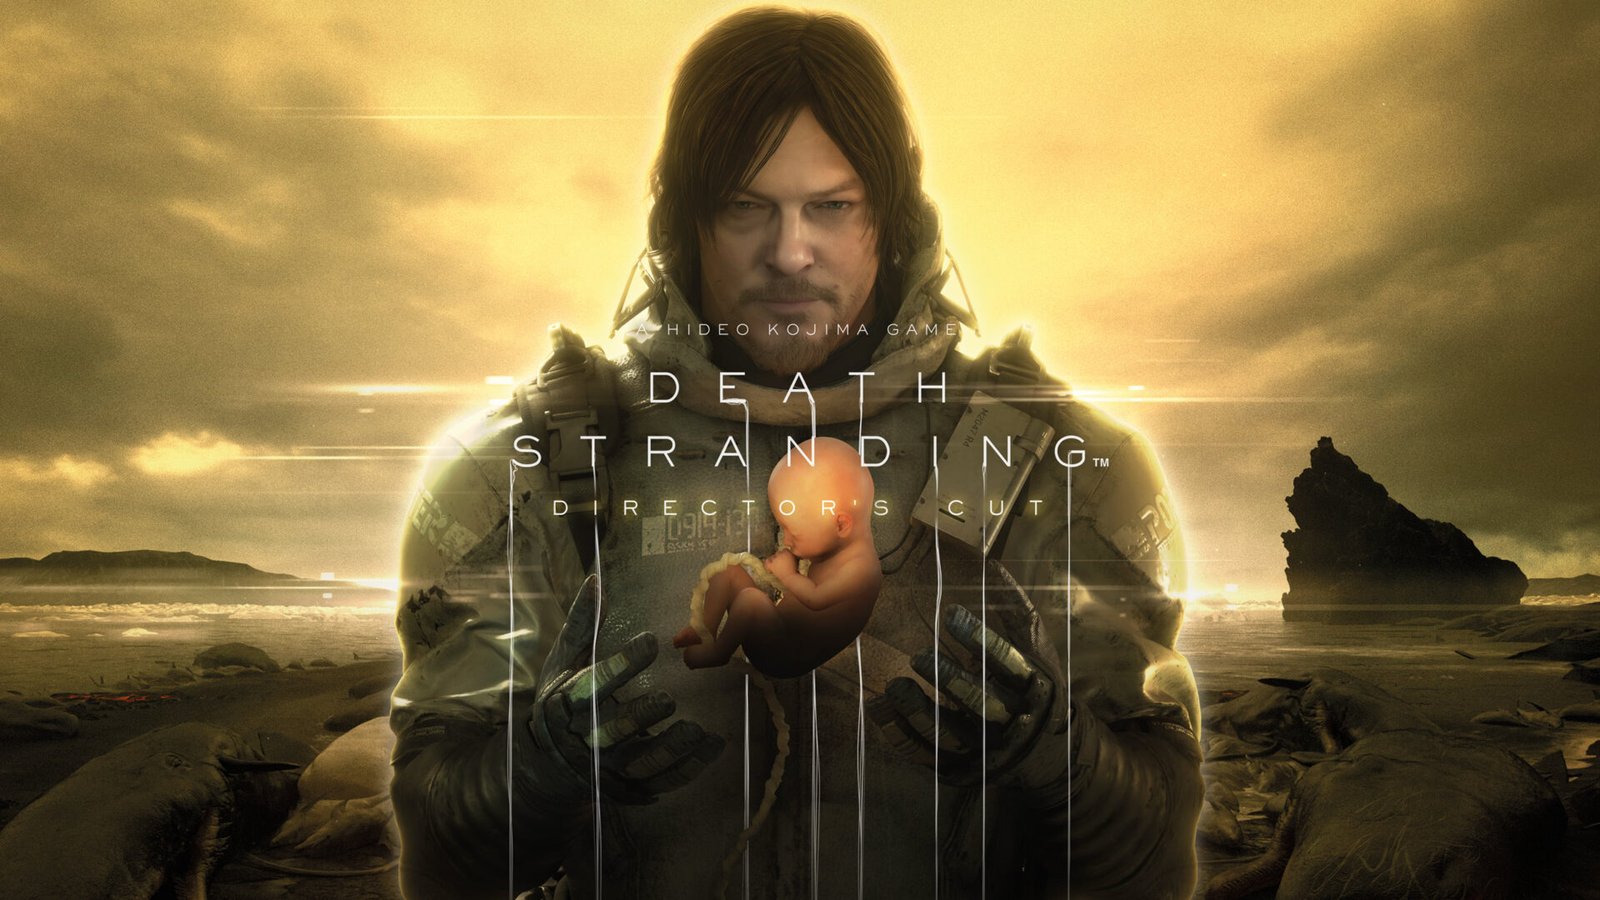 Death Stranding Director’s Cut is now free on Epic Games Store for a limited time